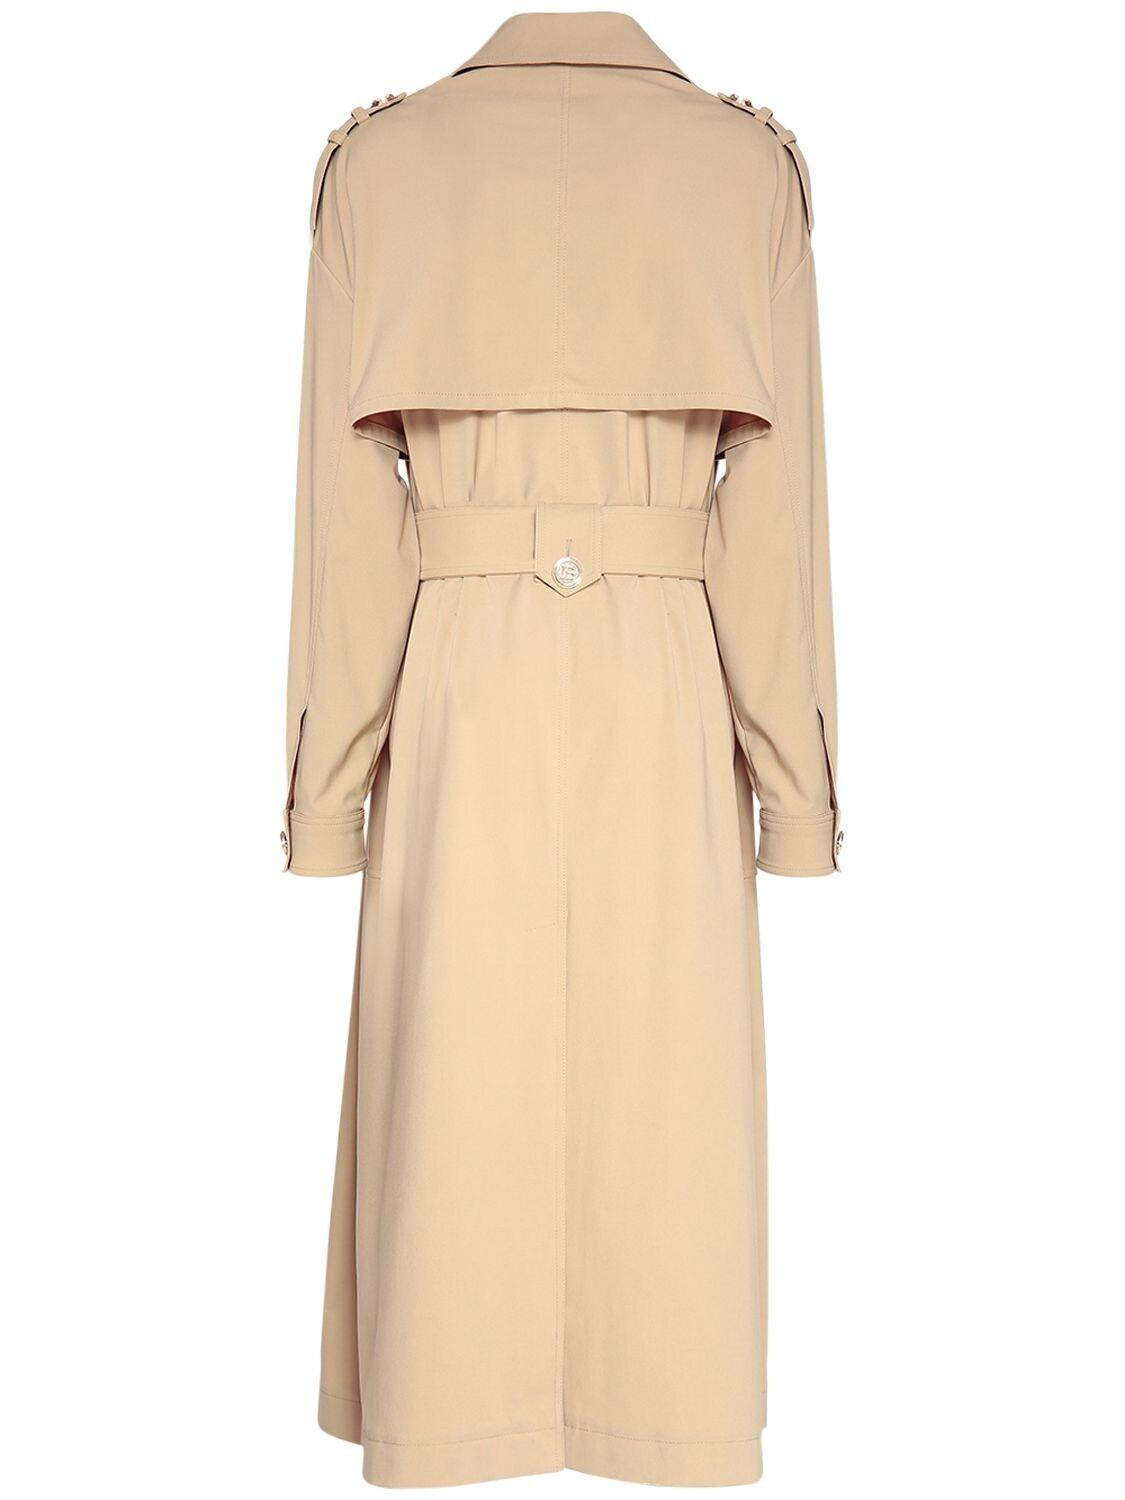 Balmain Buttoned Trench Coat W/ Cargo Pockets in Beige (Natural) - Lyst